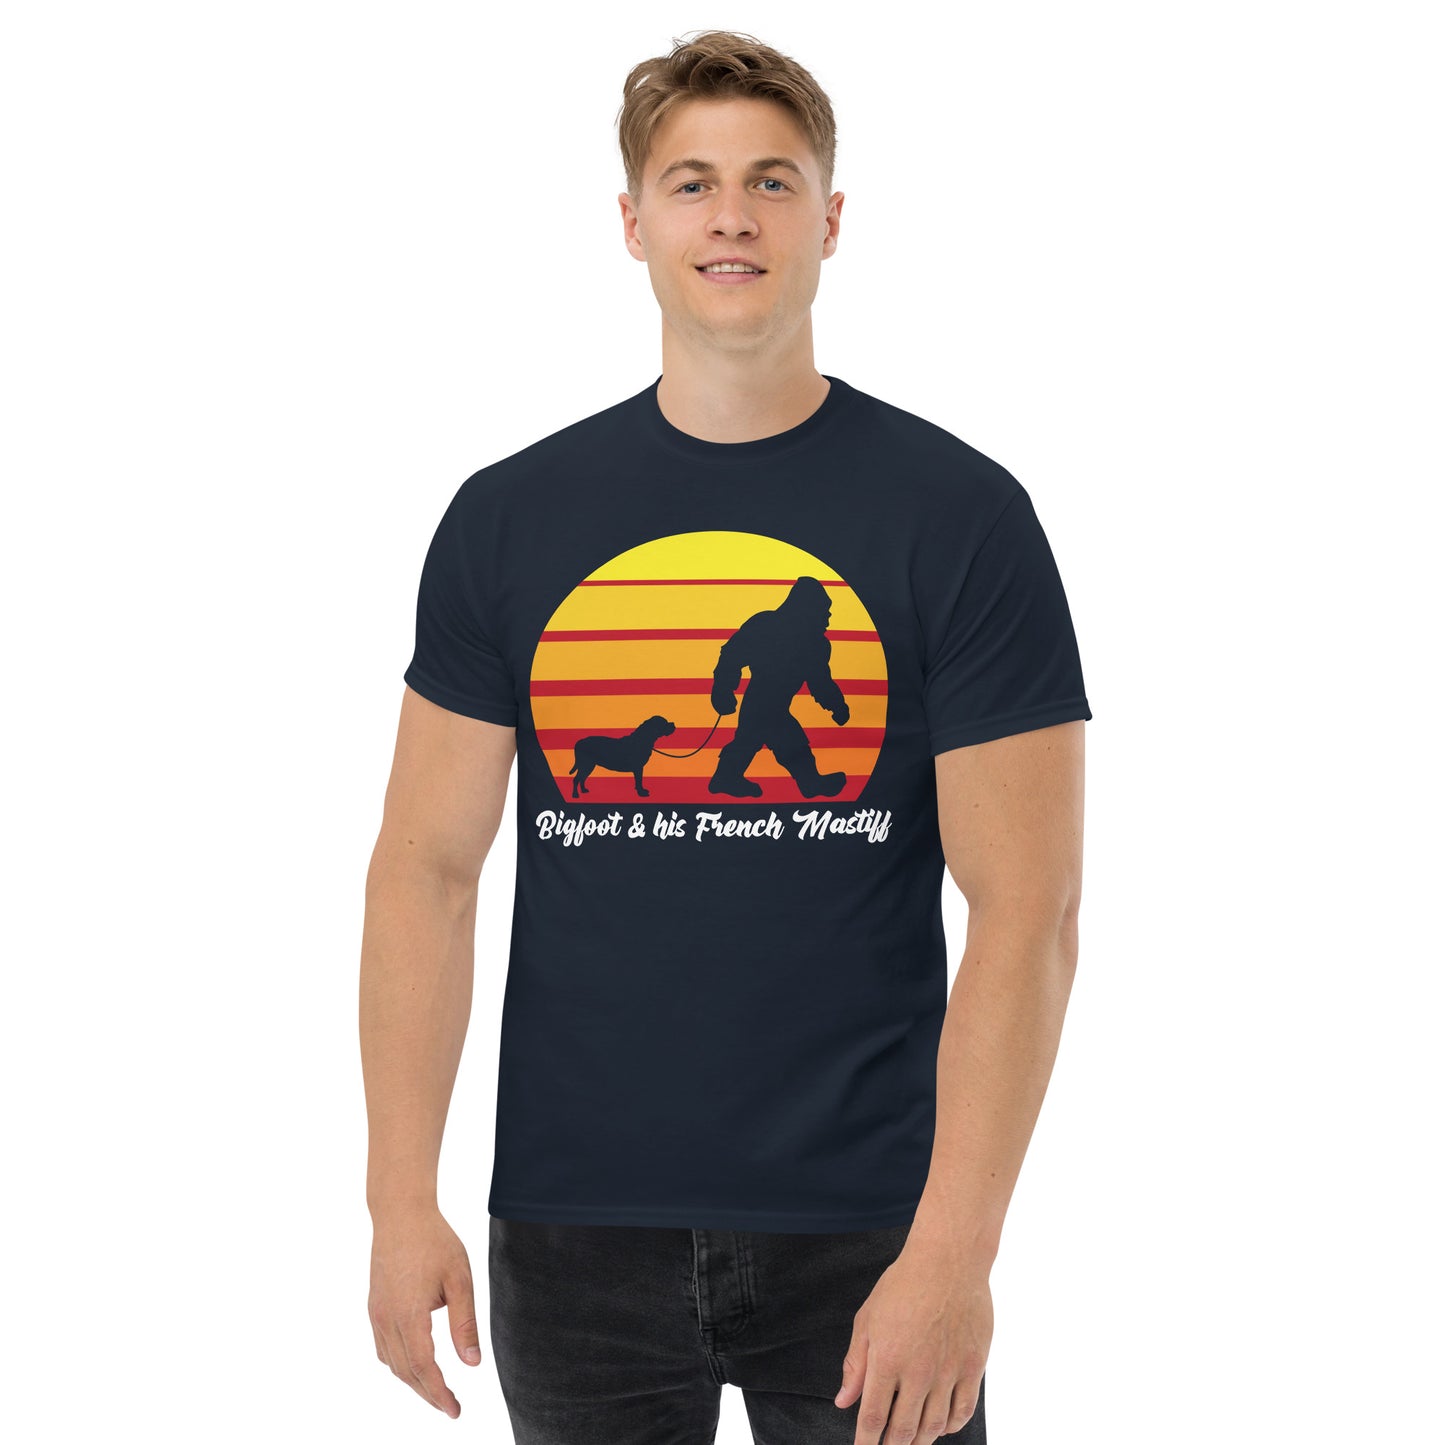 Big foot and his French Mastiff men’s navy t-shirt by Dog Artistry.